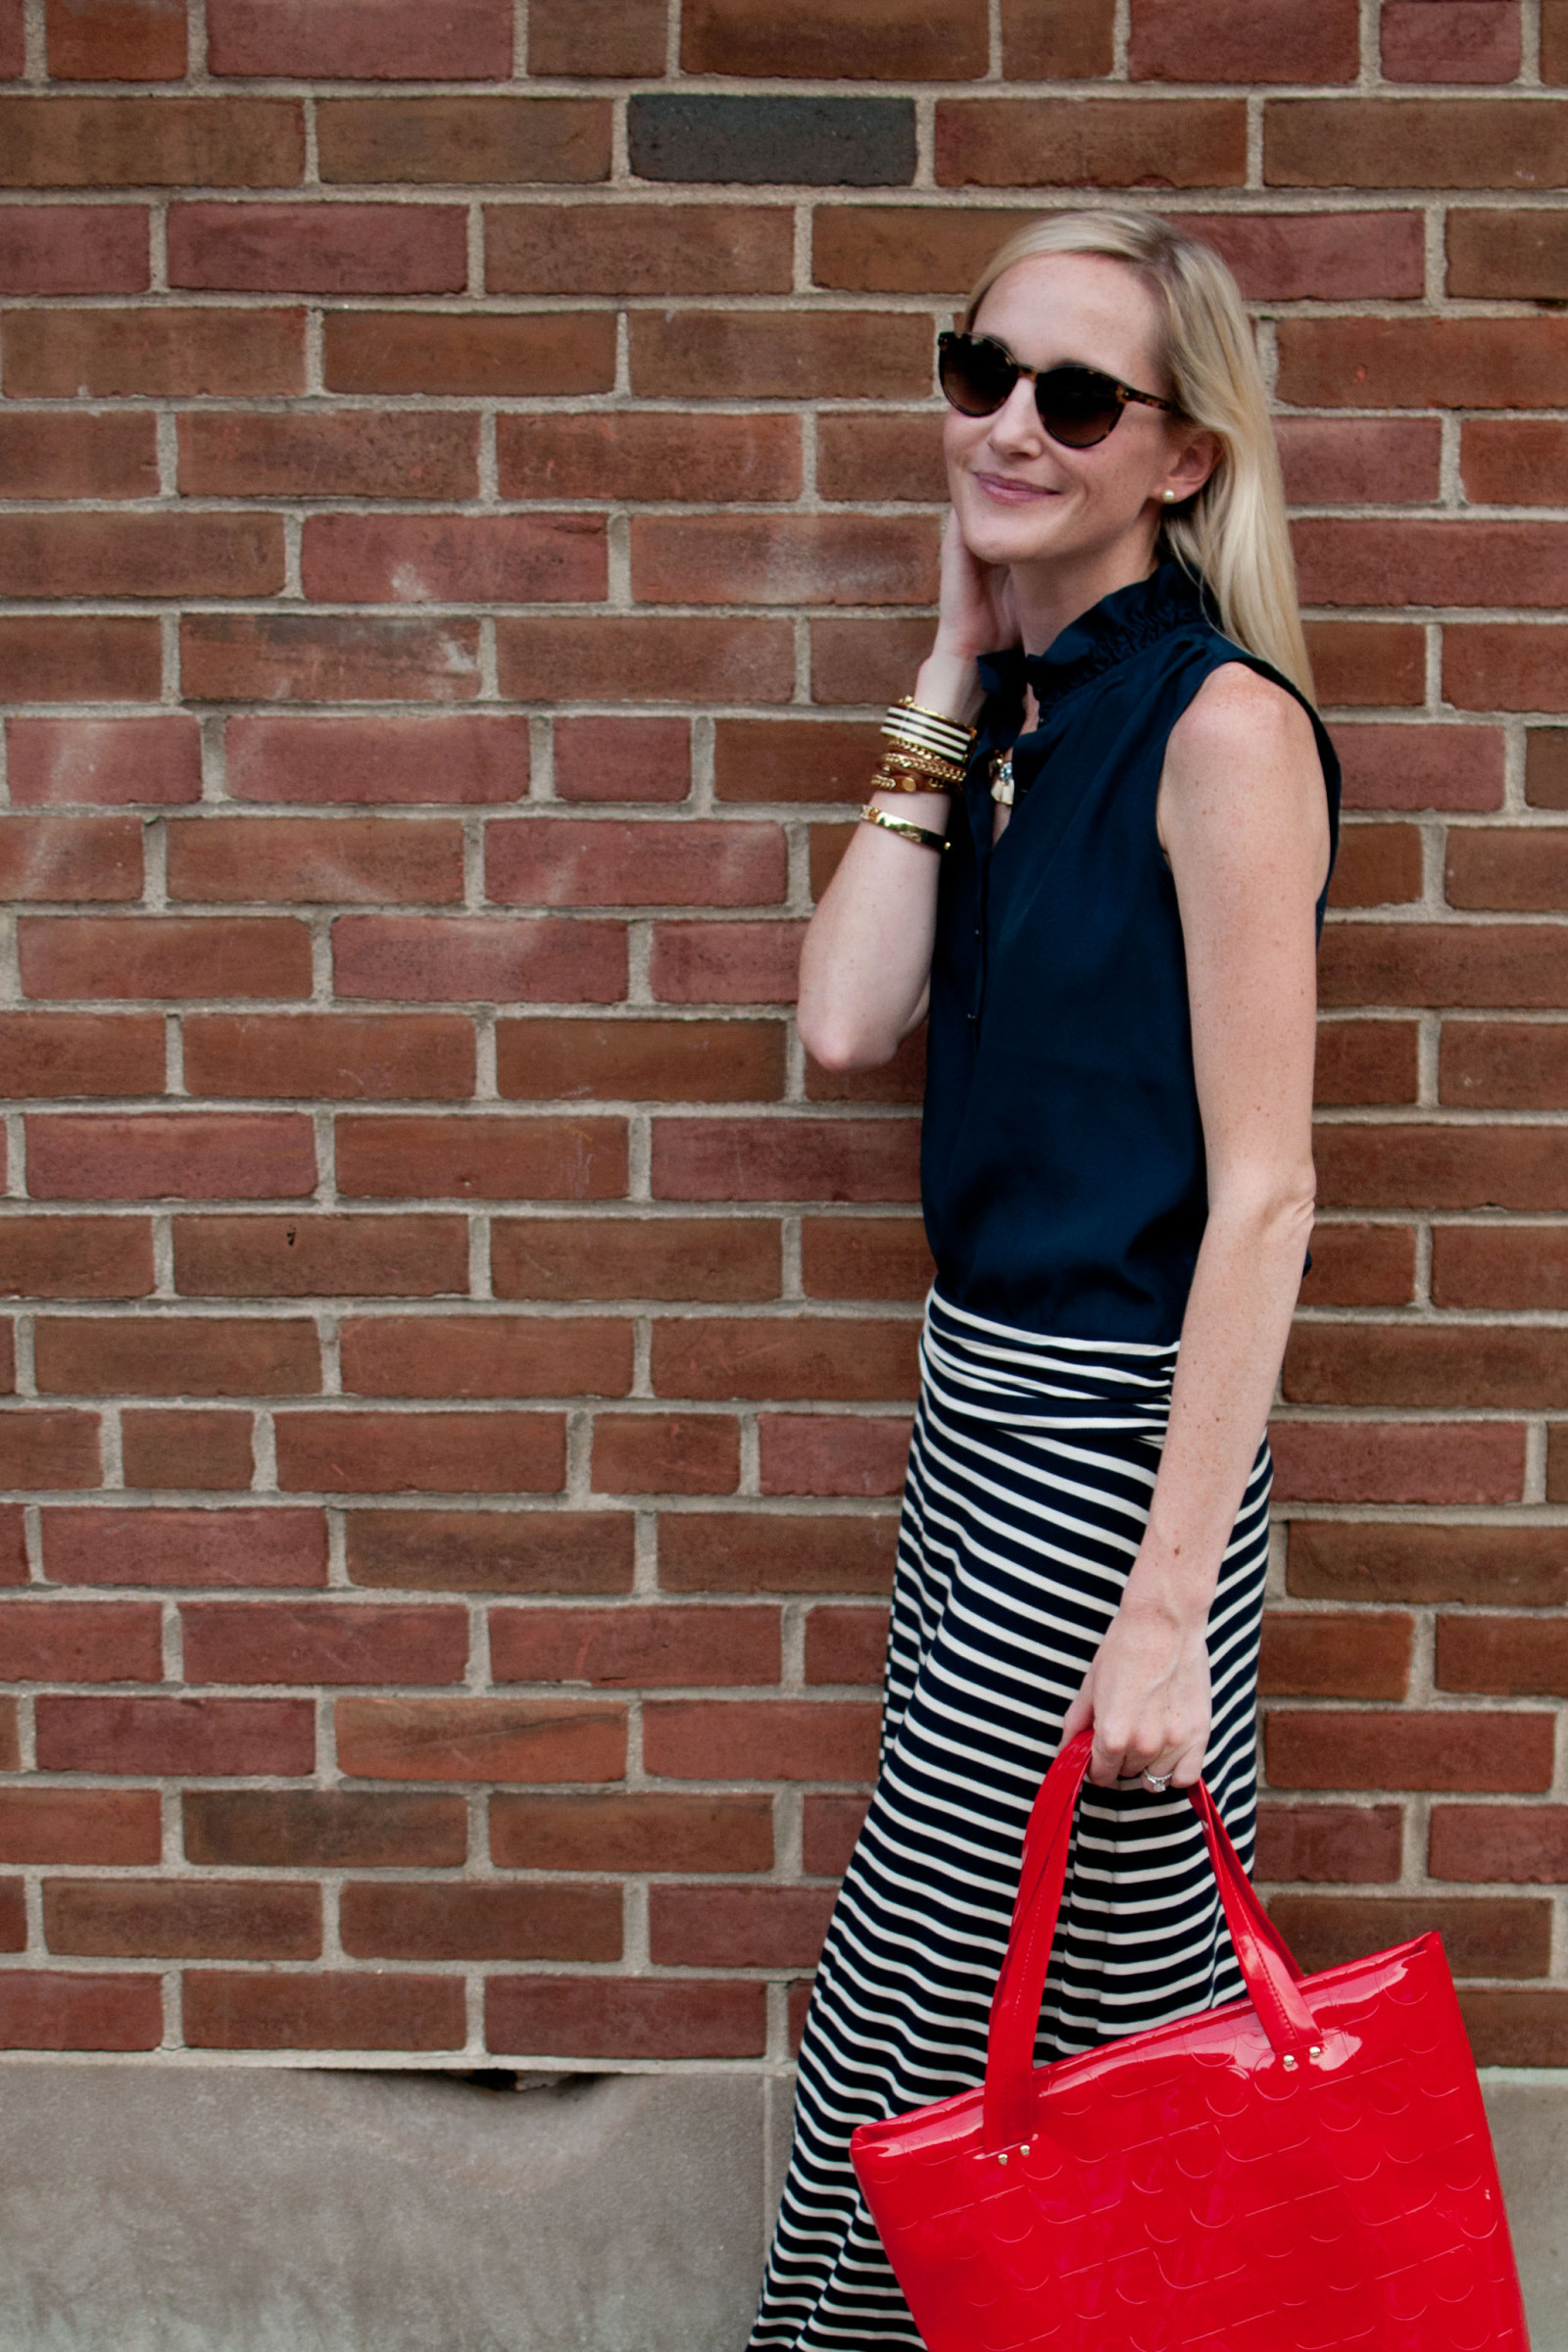 Striped Maxi Skirts, Statement Necklaces and Red Totes